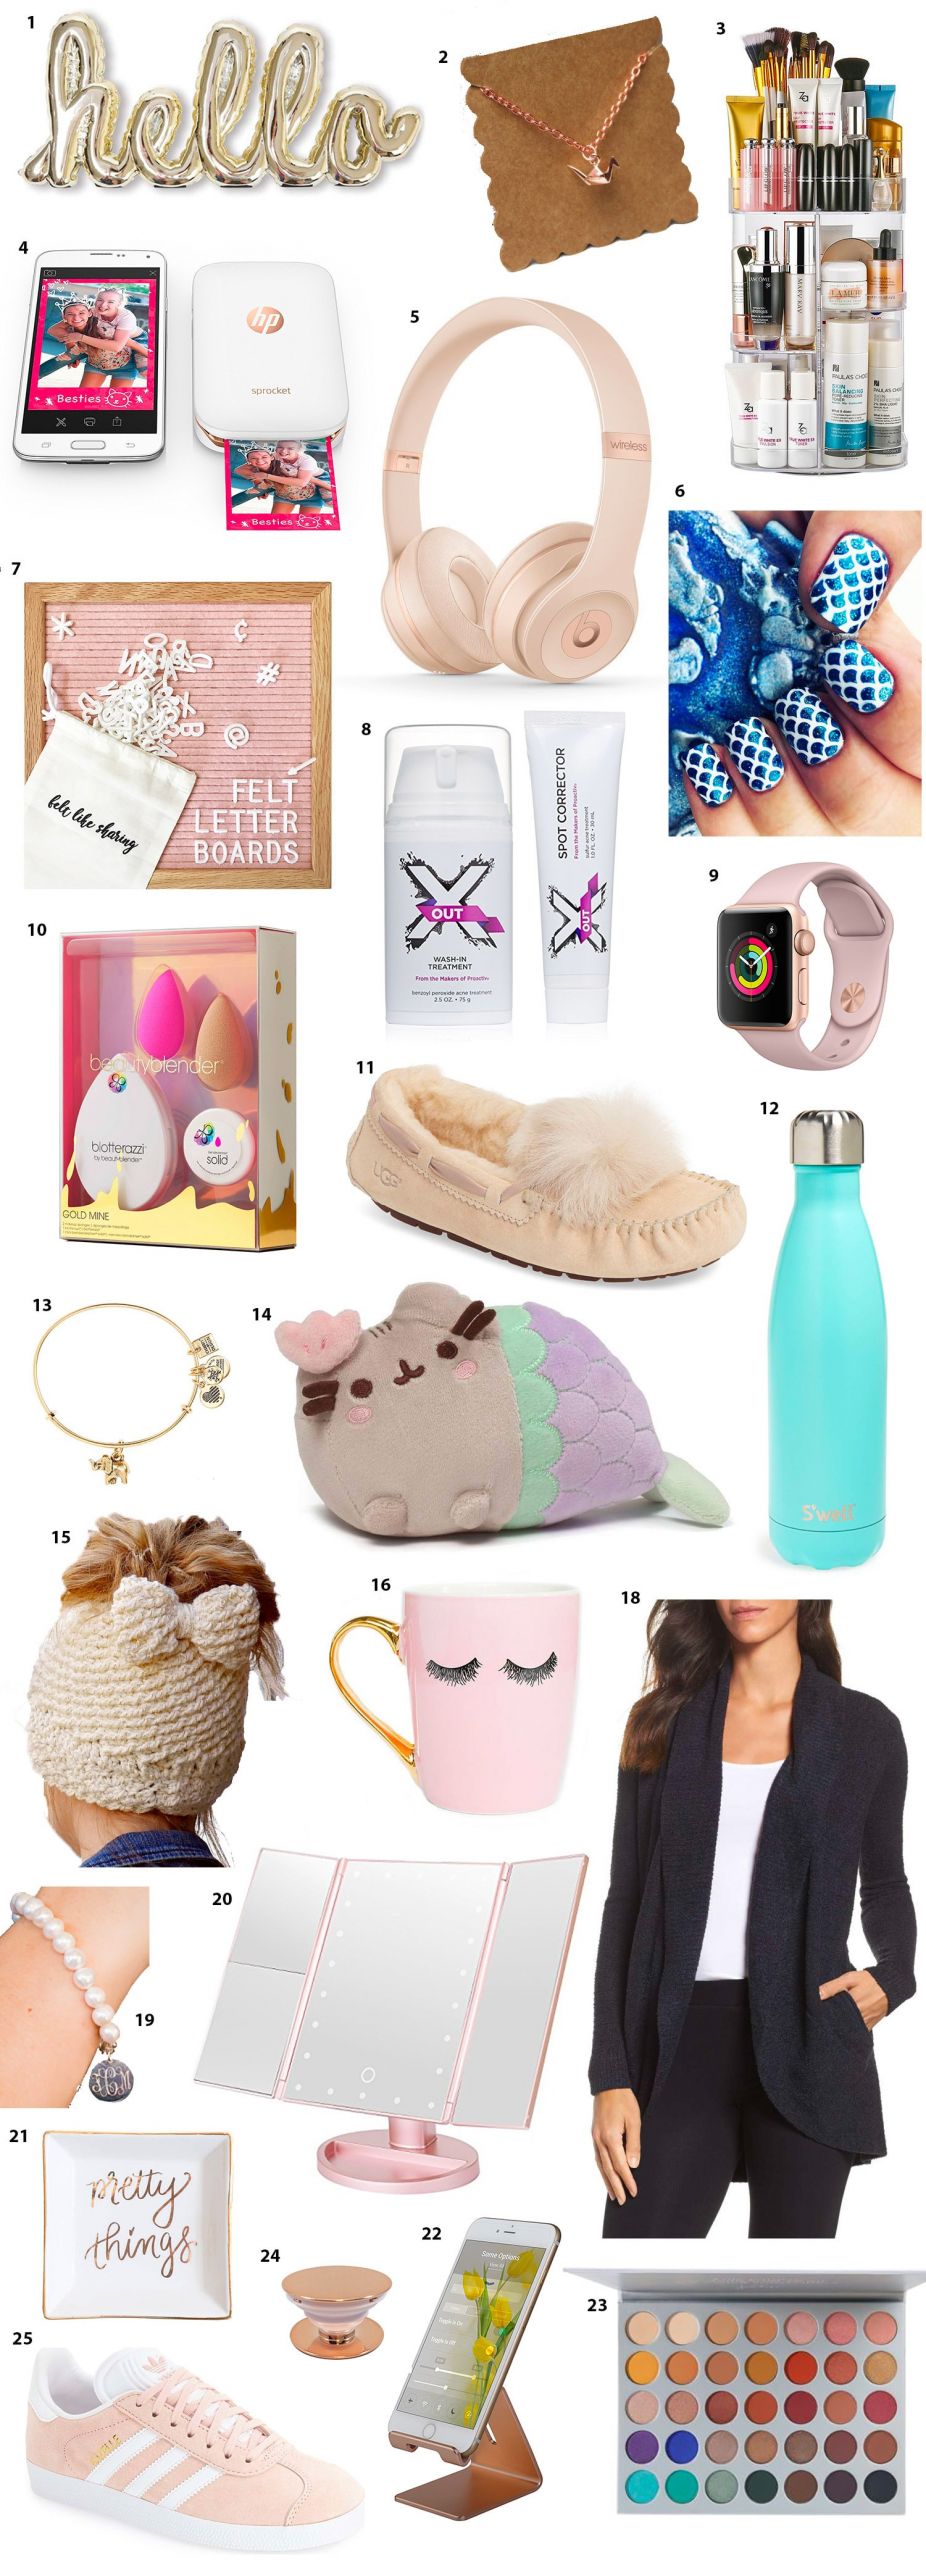 Xmas Gift Ideas For Girls
 Top Gifts for Teens This Christmas